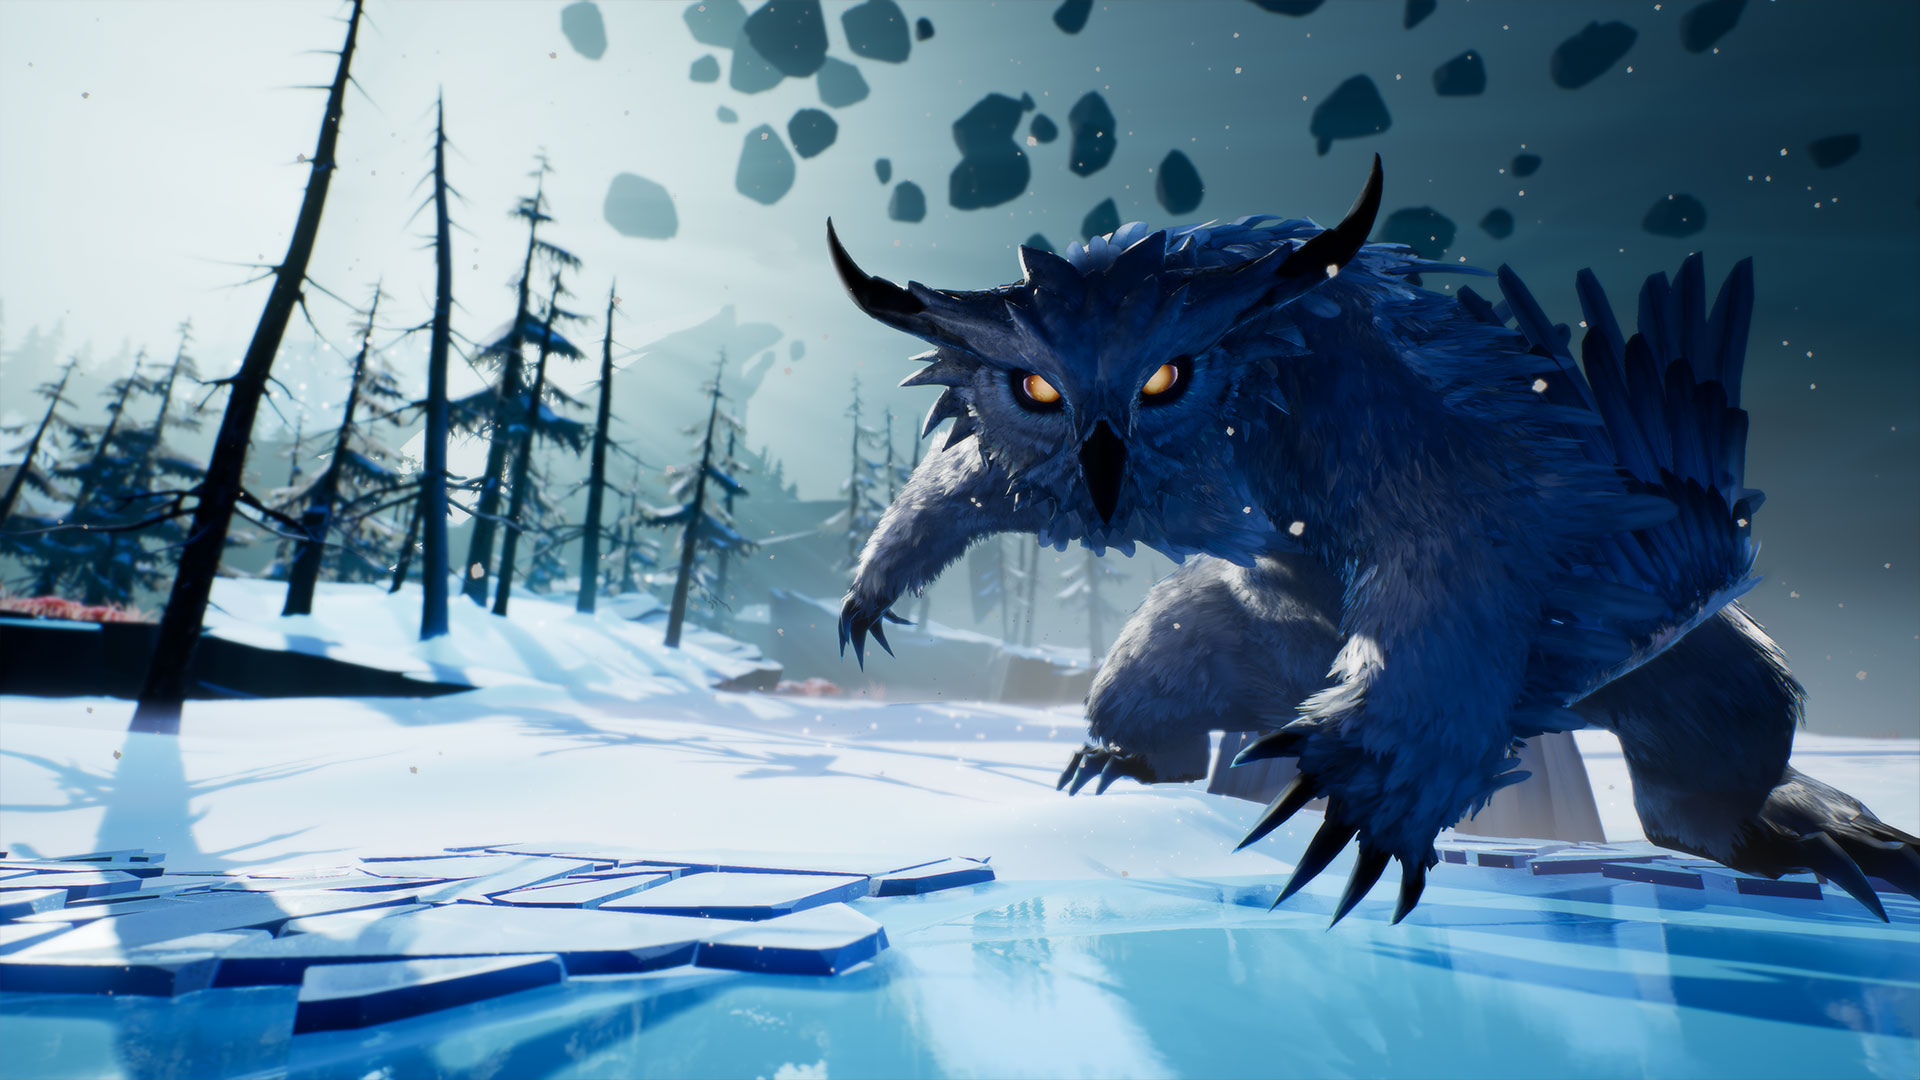 Dauntless is PS4’s new action RPG that wants you to notice it’s like Monster Hunter… only free-to-play